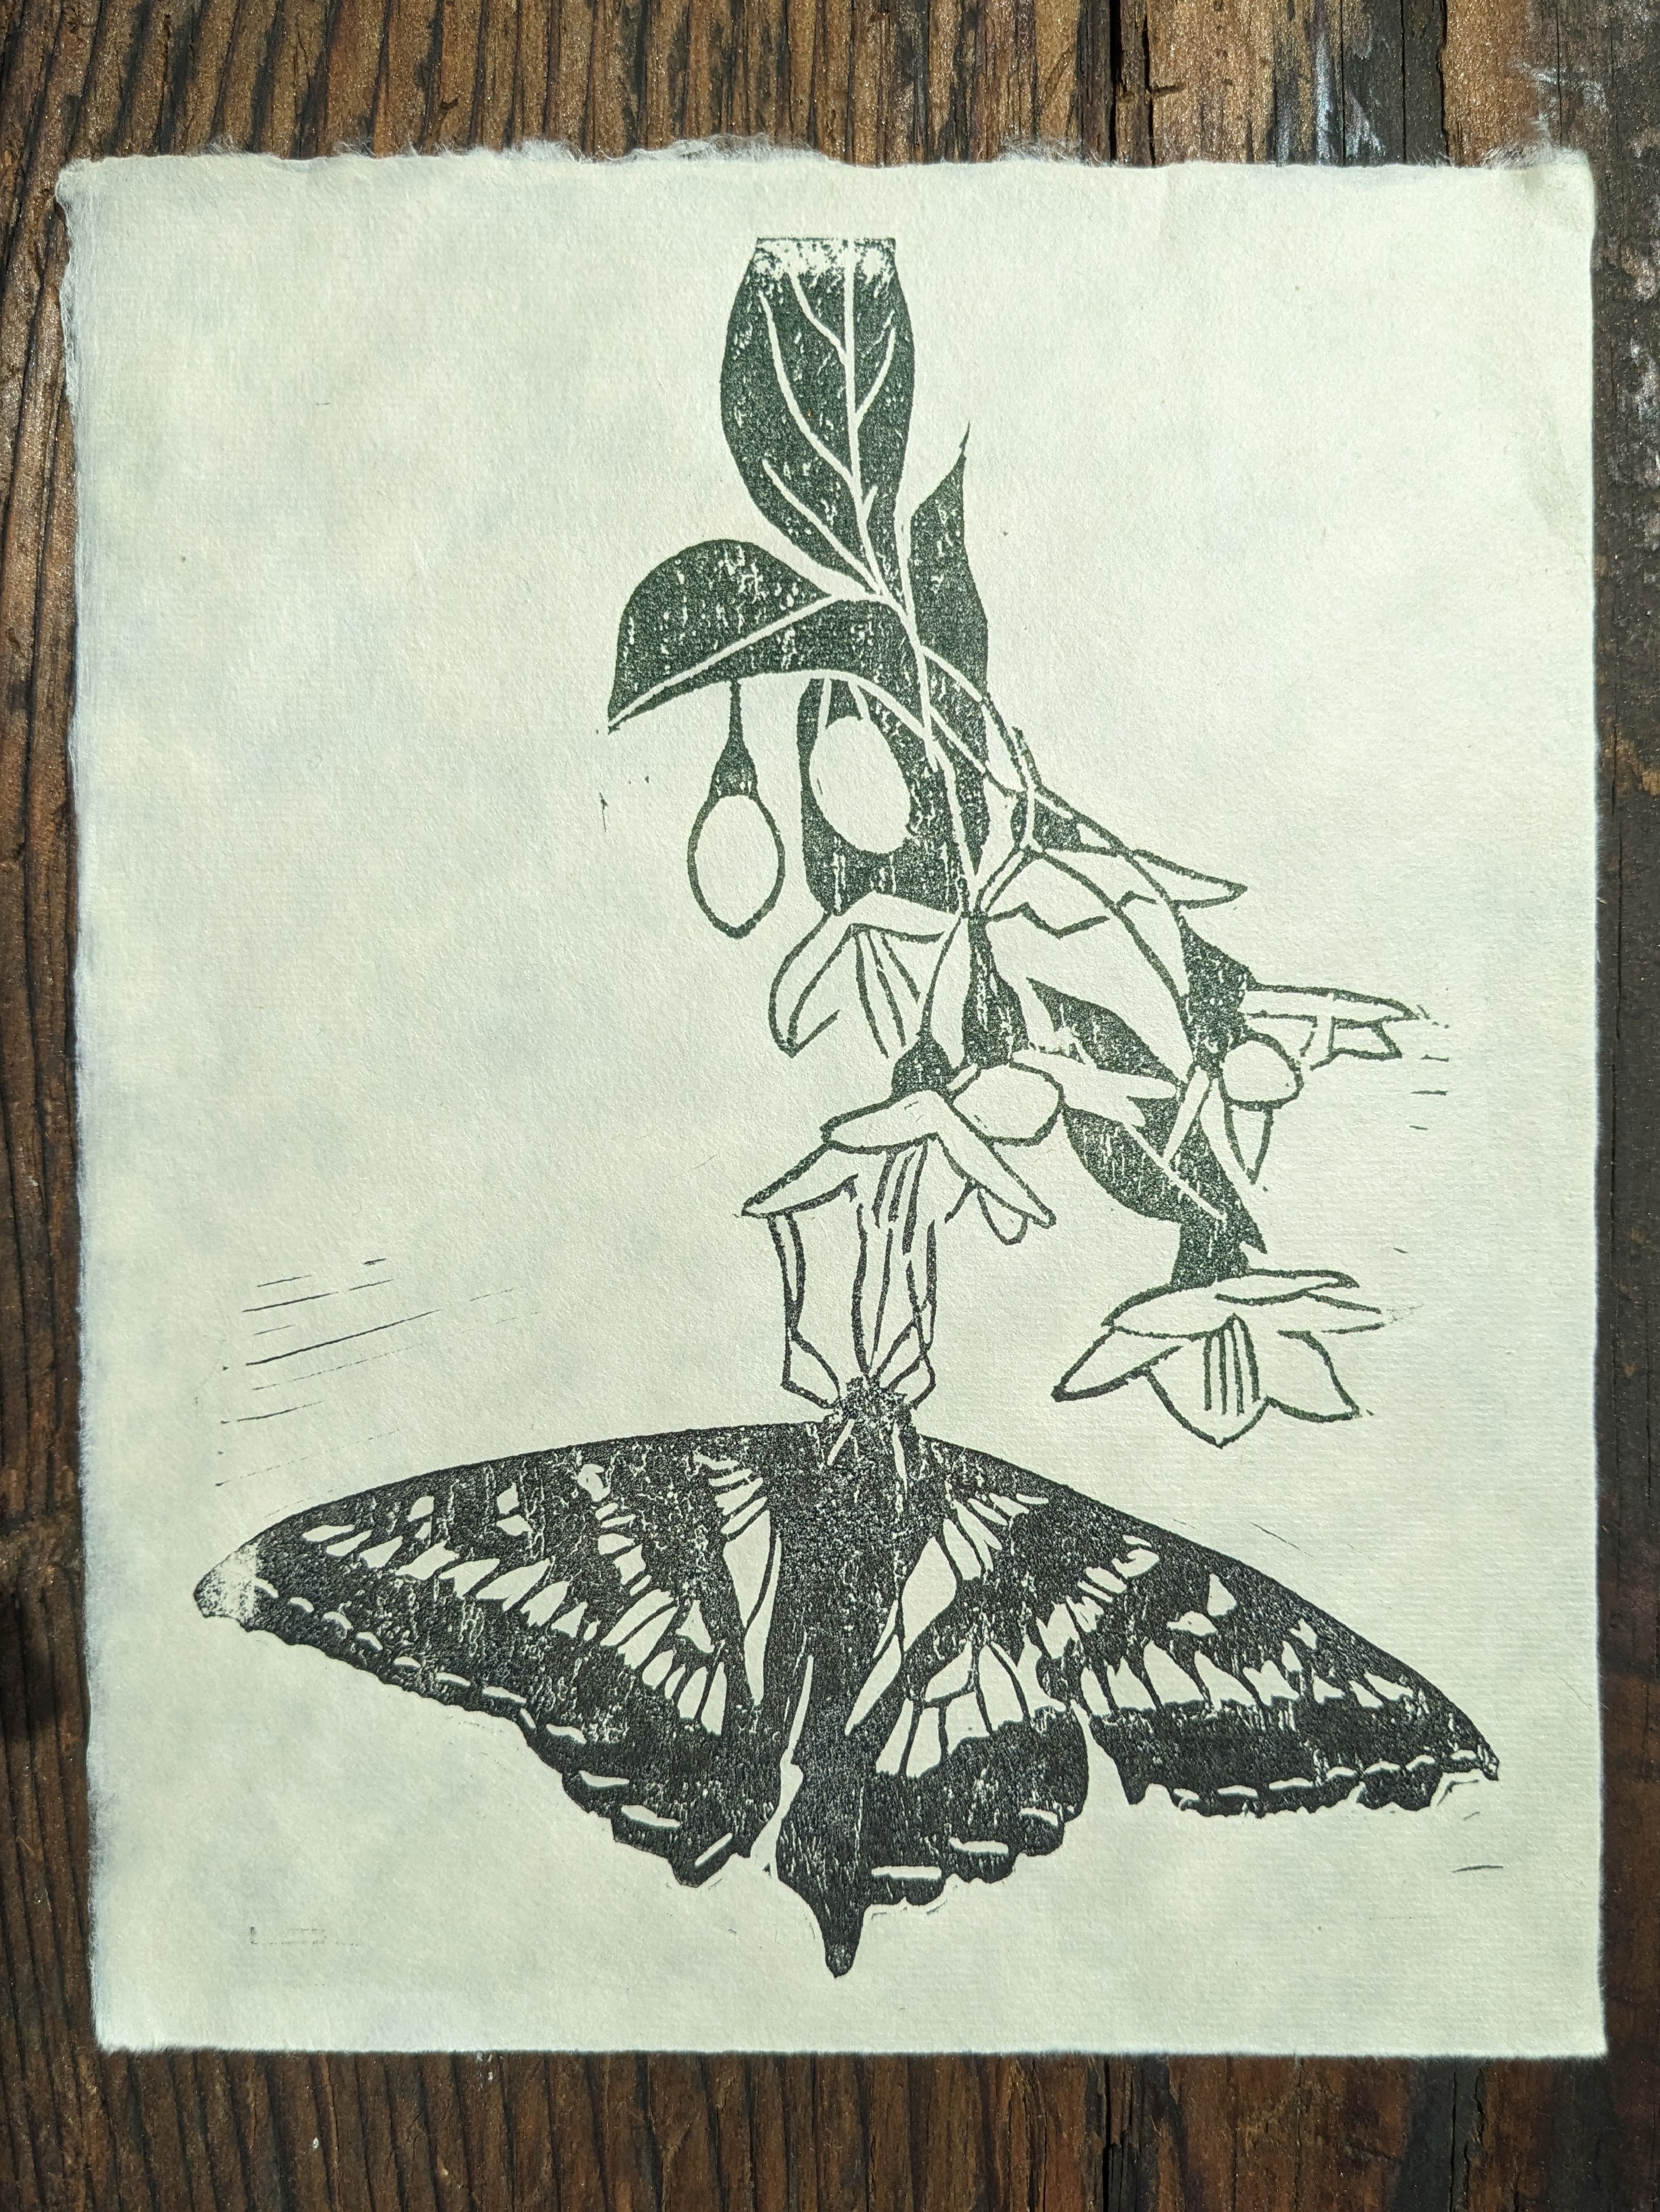 A block print of a tiger swallowtail butterfly dangling from Japanese snowdrops, a white drooping flower.